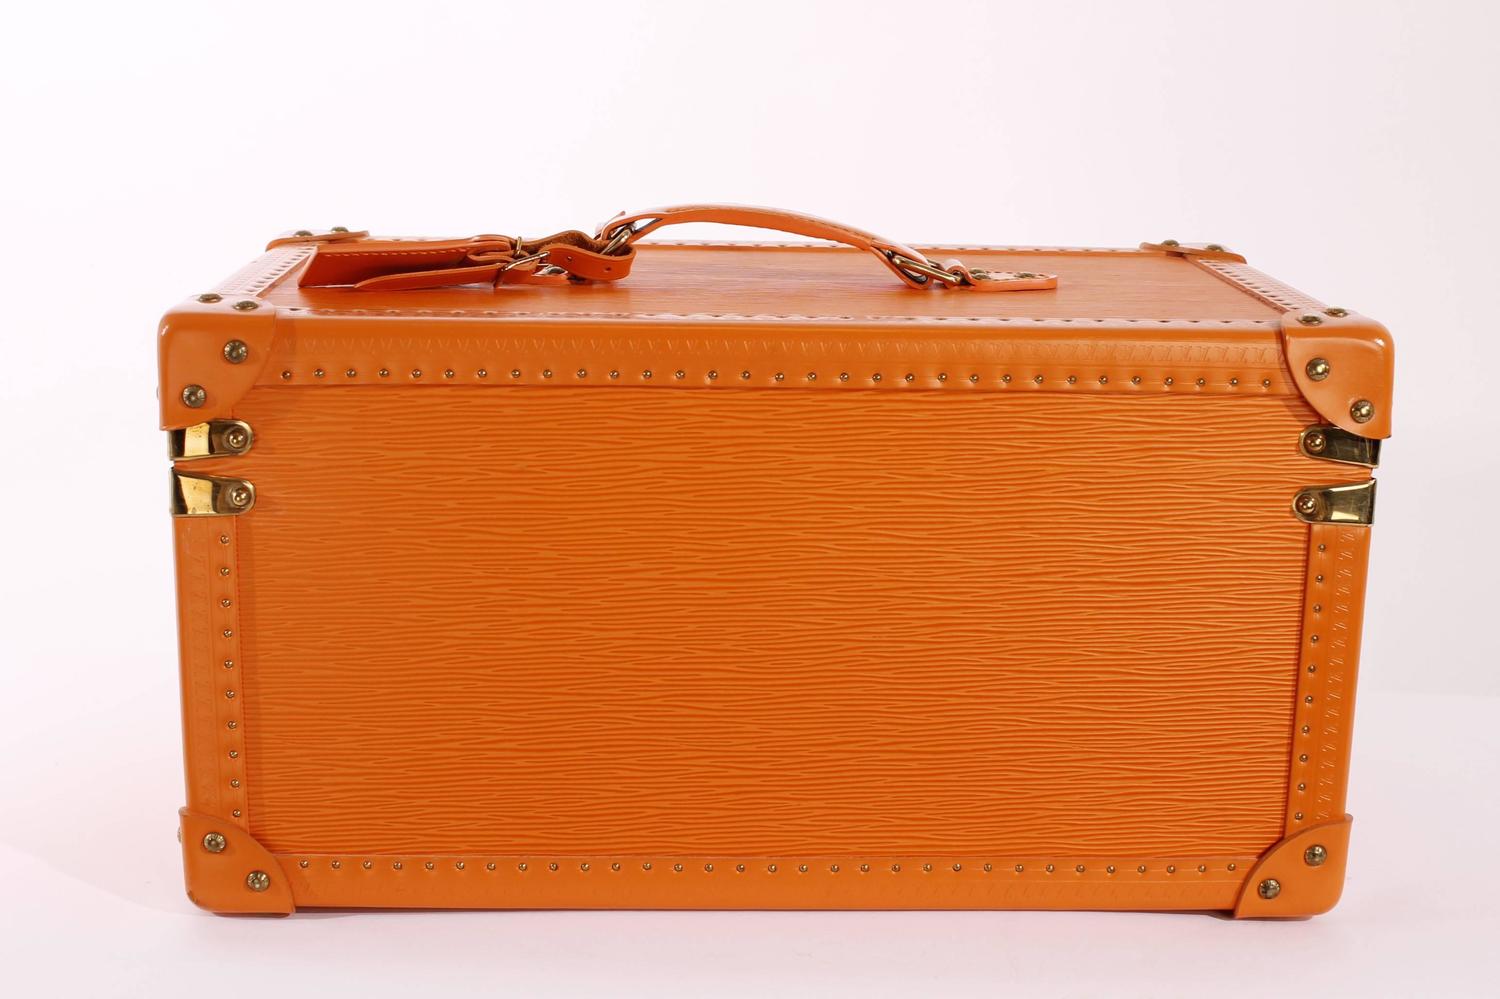 Louis Vuitton Cosmetic Trunk Beauty Case Orange Epi Boite Et Glace-Special Order at 1stdibs